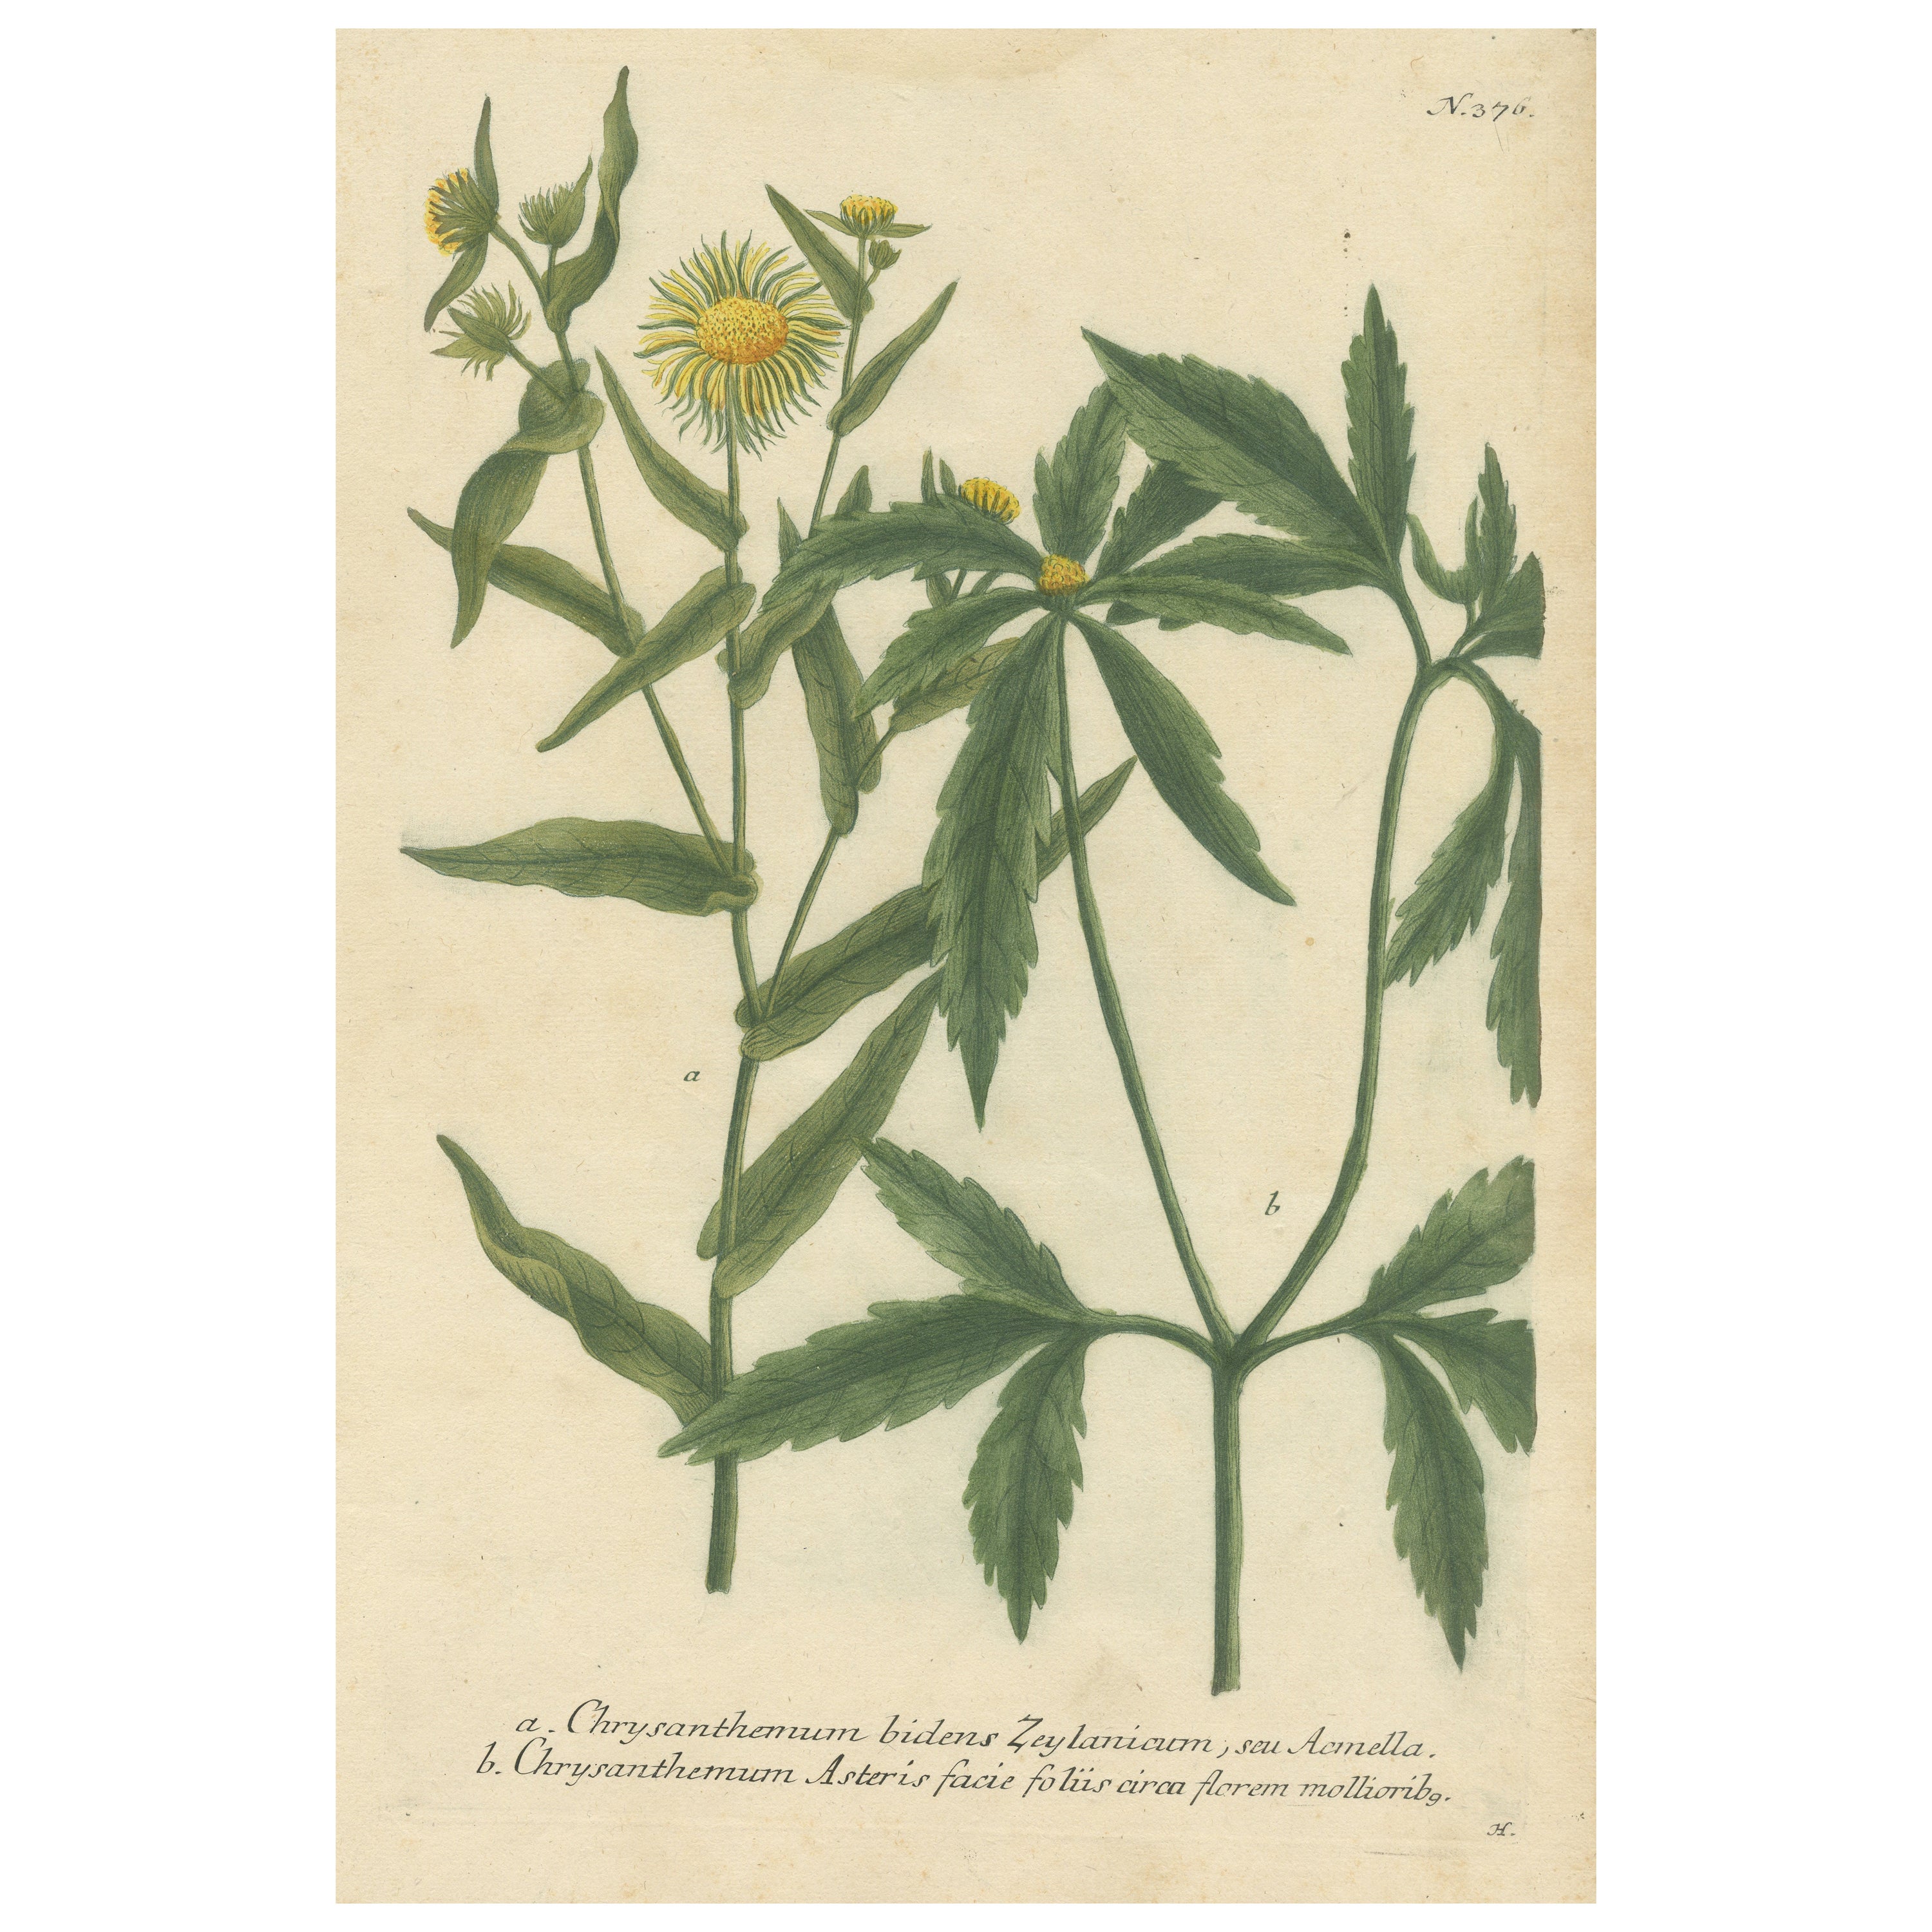 Hand-finished Mezzotint Engraving of two Chrysanthemum species For Sale